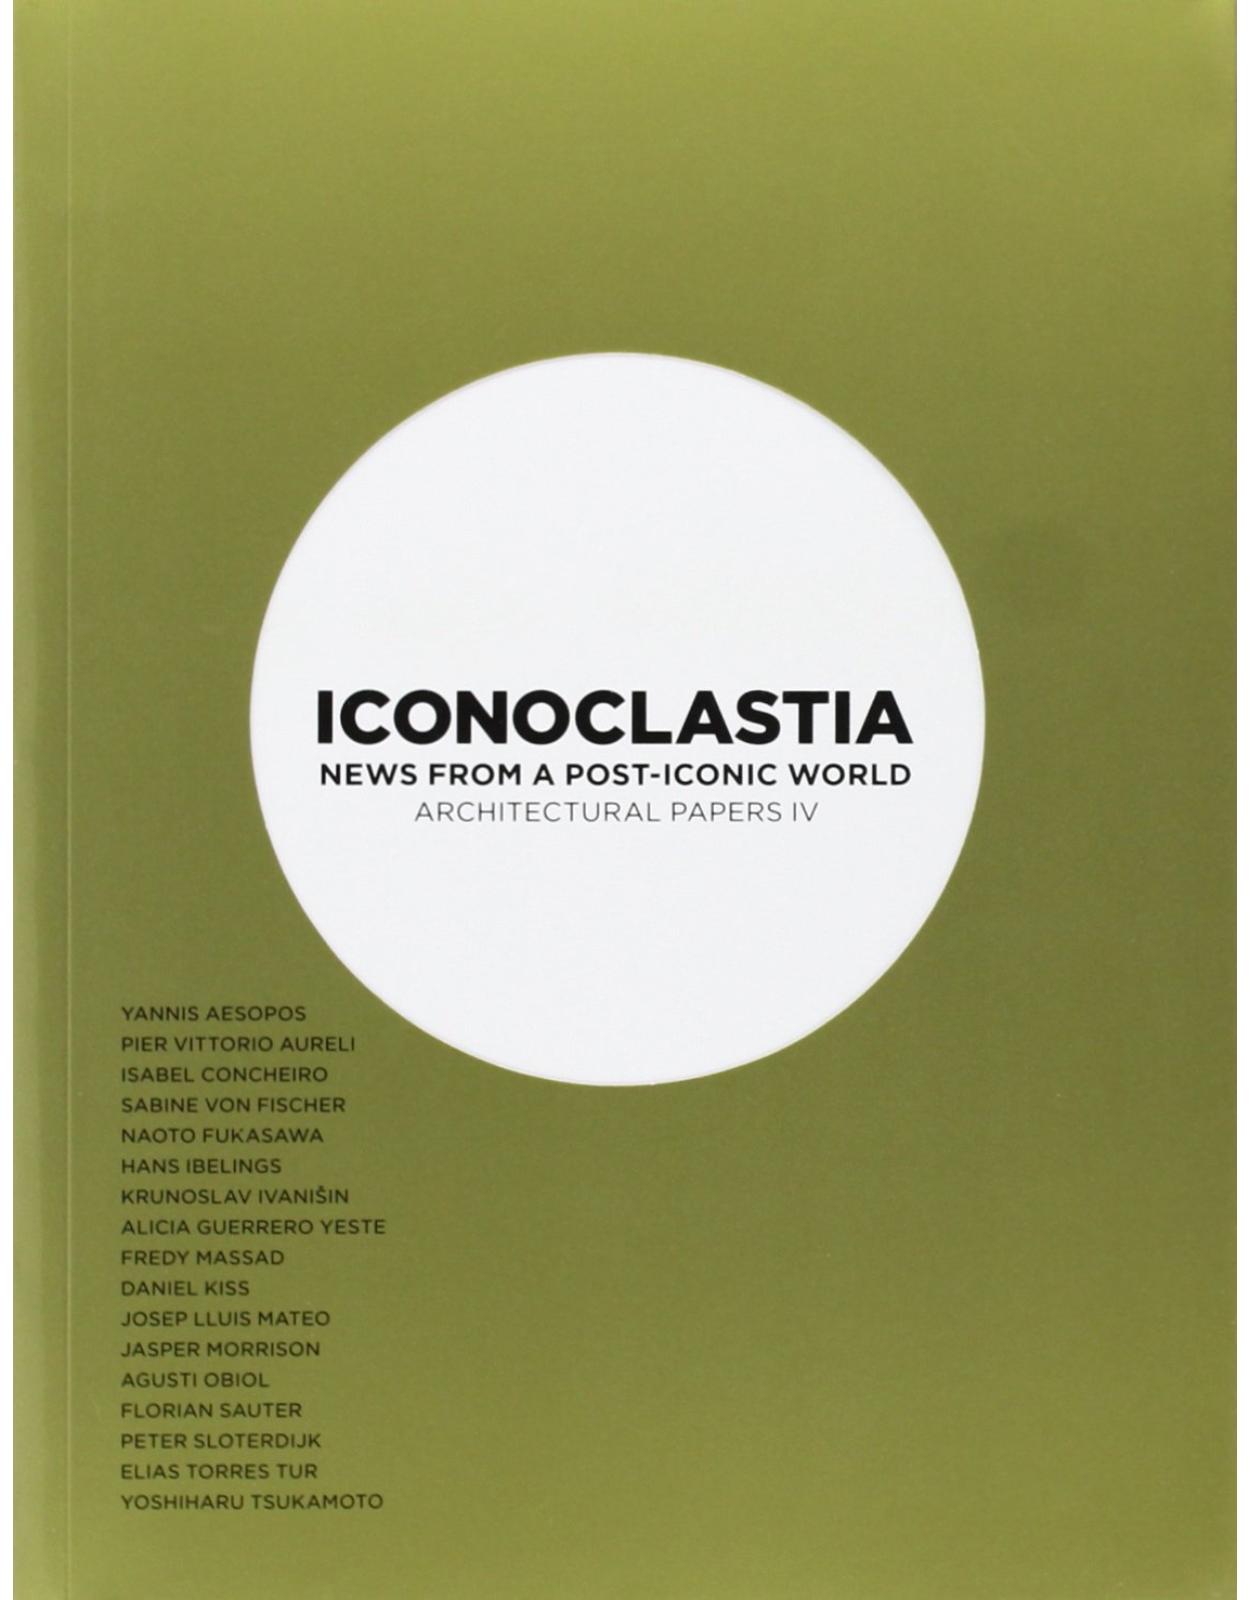 Iconoclastia. News from a post-iconic world Architectural papers IV